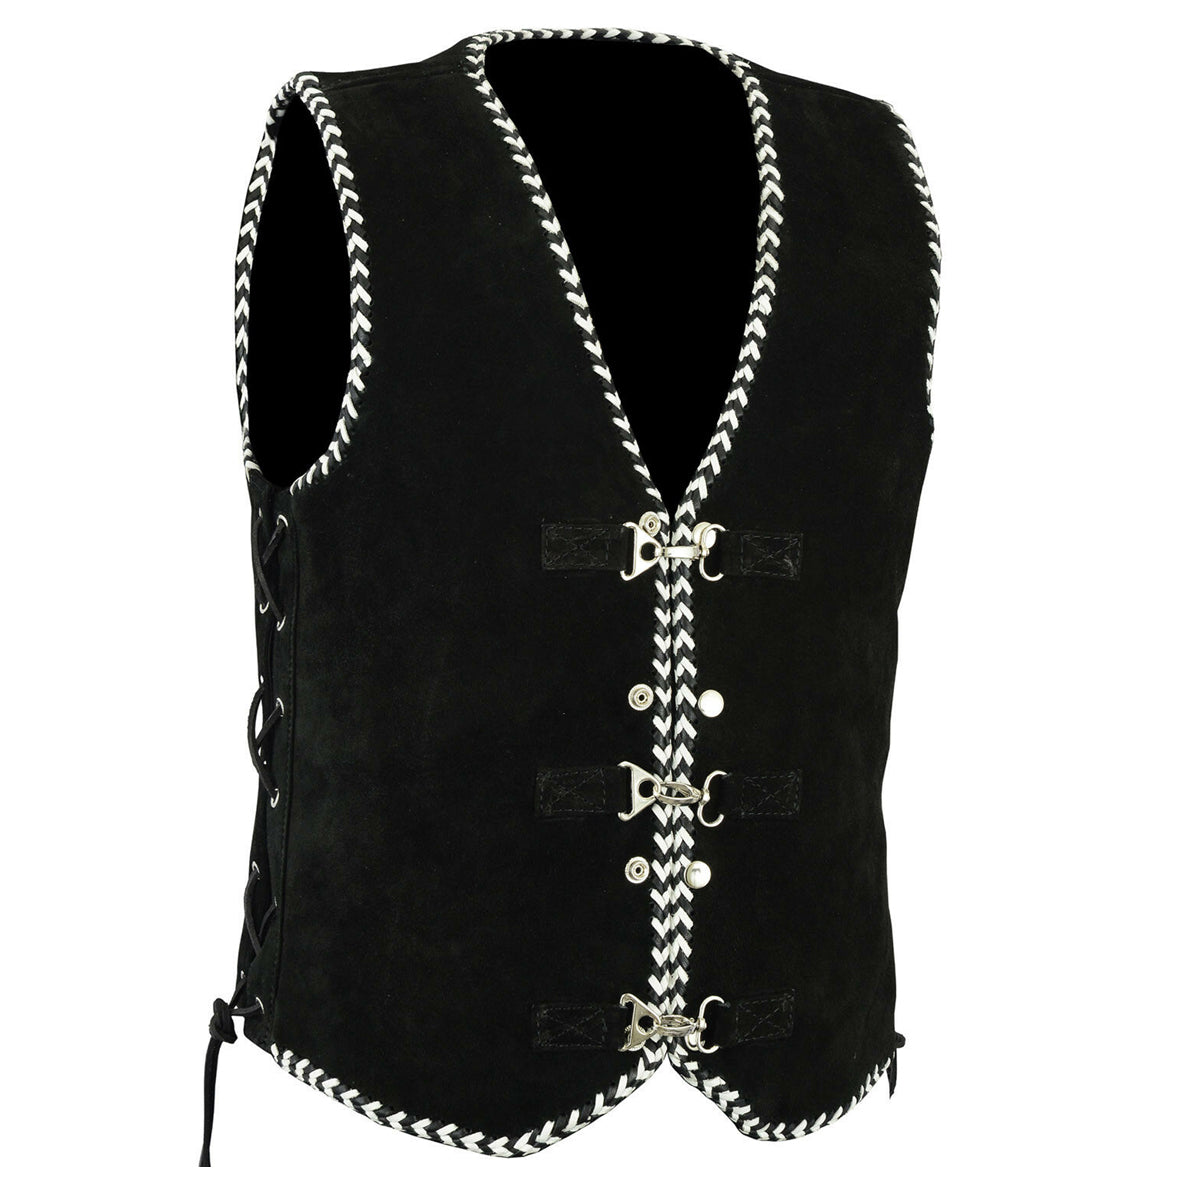 Men Cowboy Western Suede Leather Vest | Classic Motorcycle Leather Waistcoat